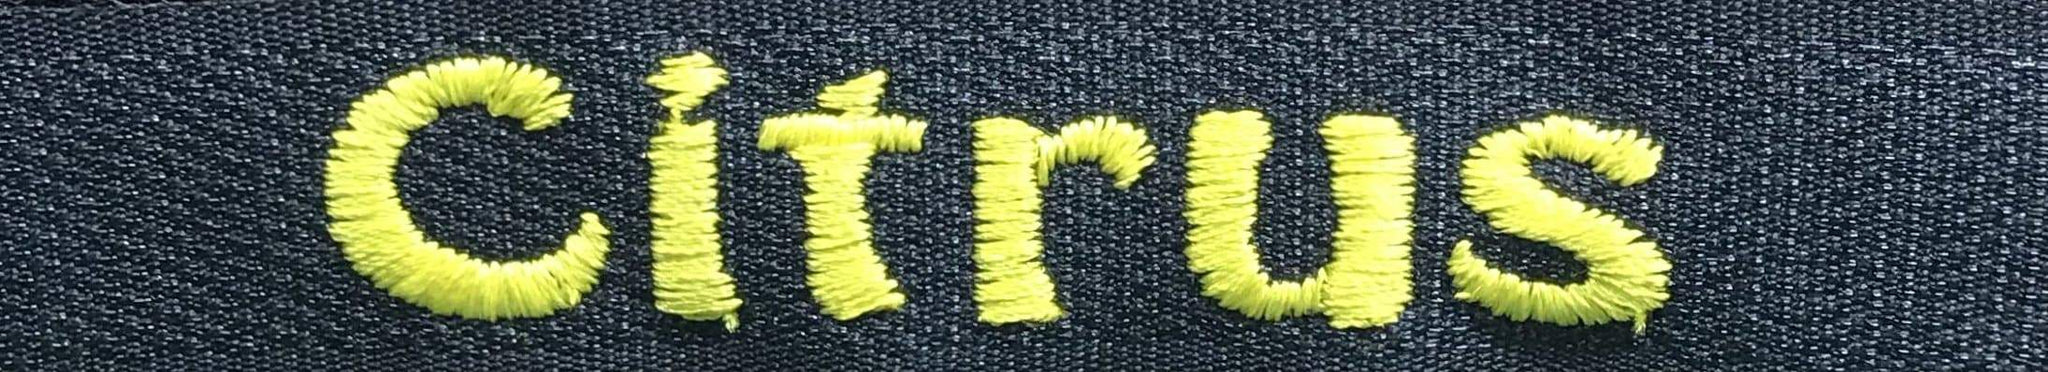 citrus embroidery sample